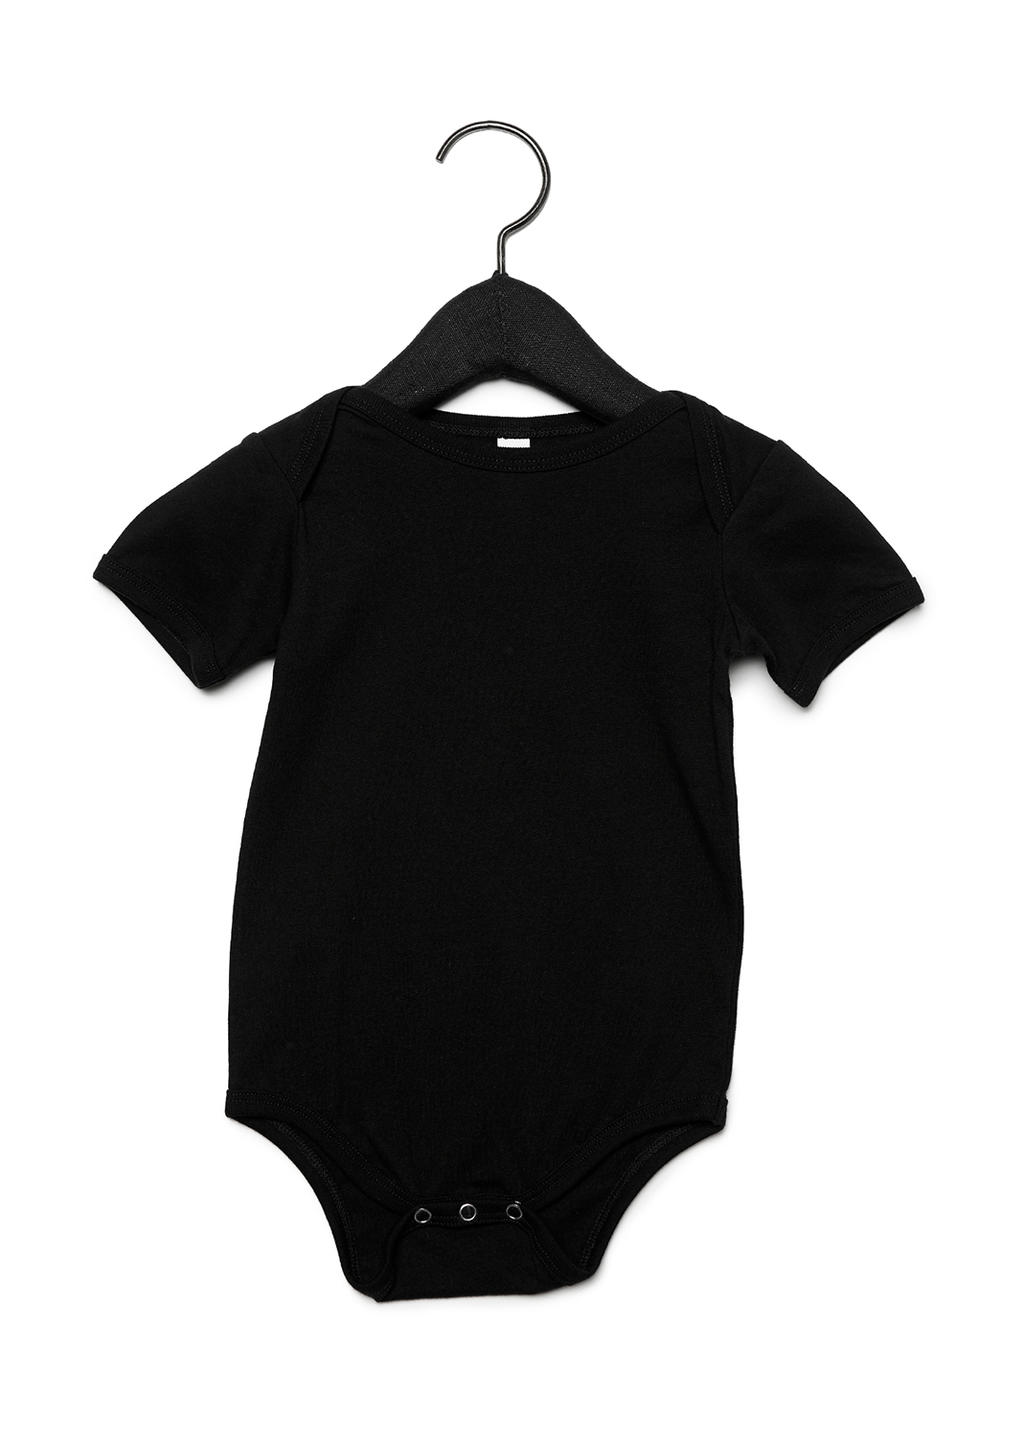  Baby Jersey Short Sleeve One Piece in Farbe Black